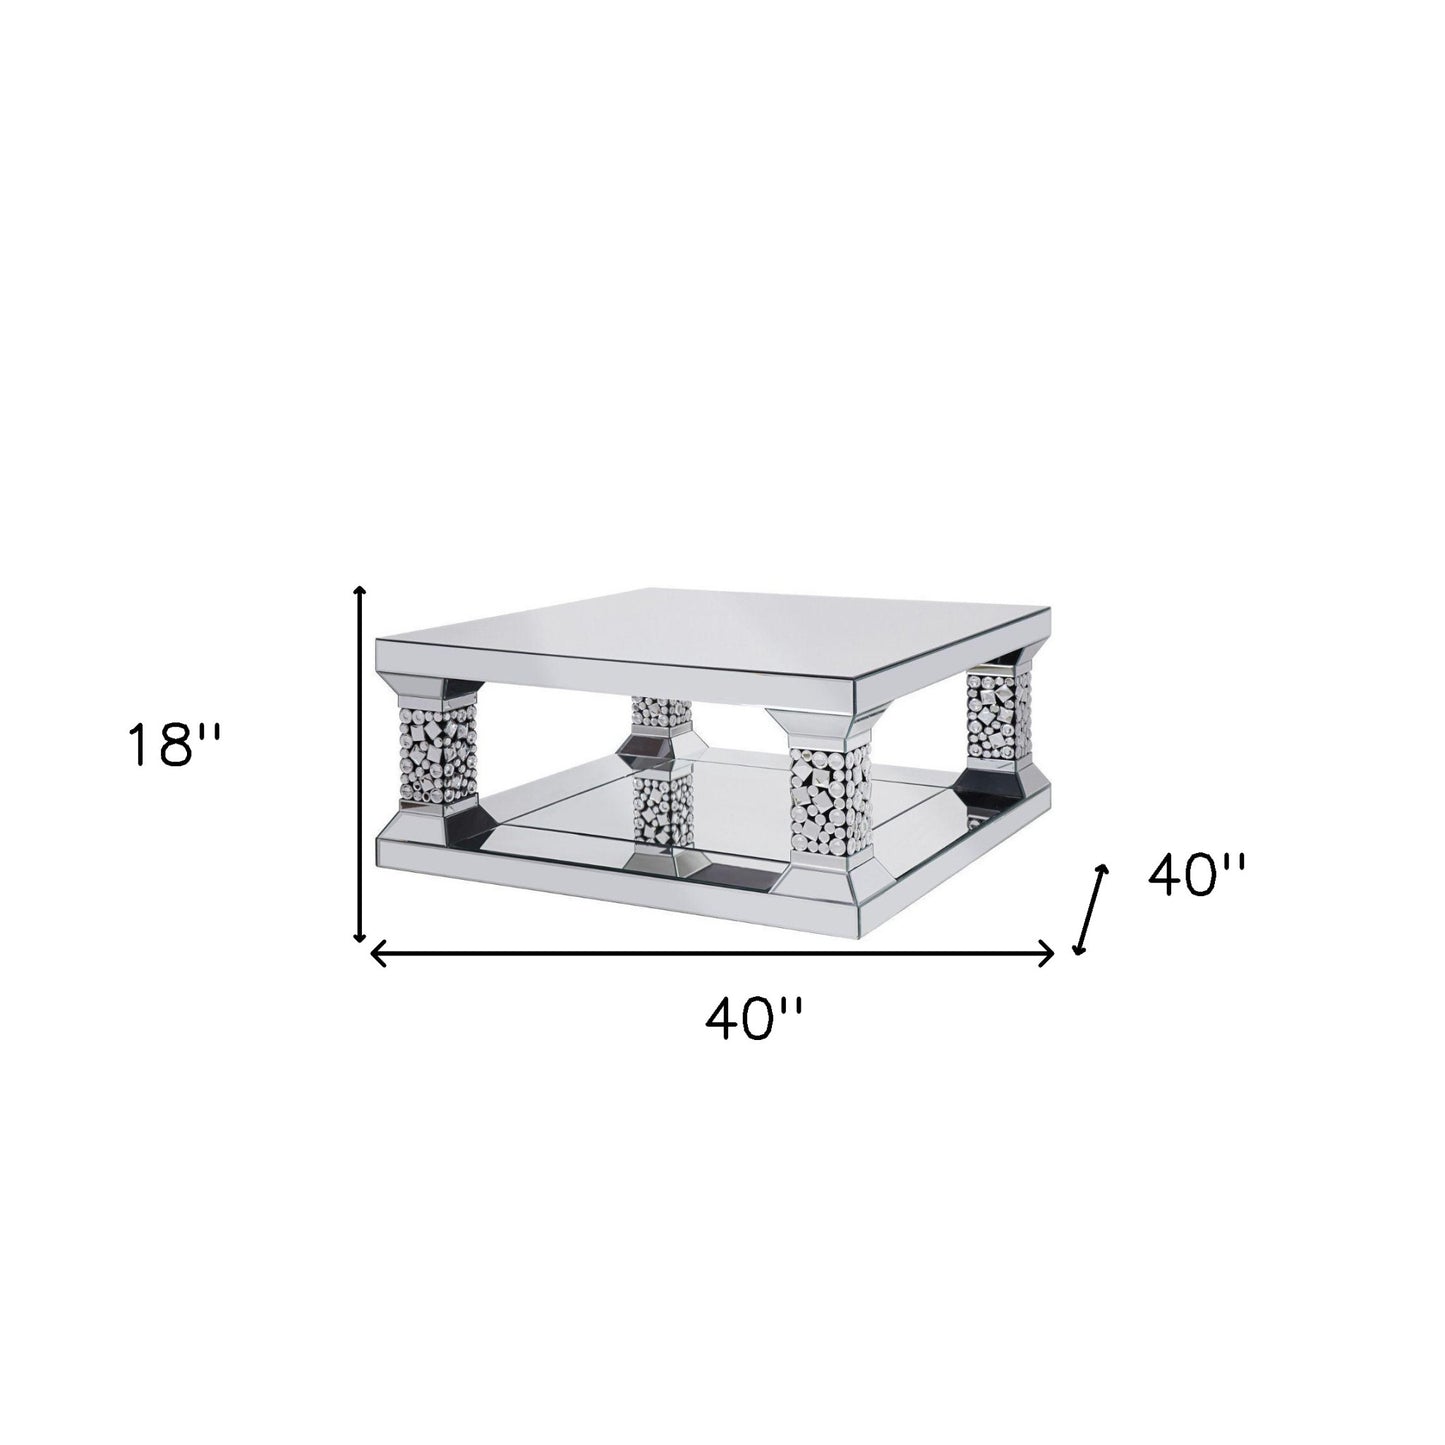 40" Silver Mirrored Square Mirrored Coffee Table By Homeroots